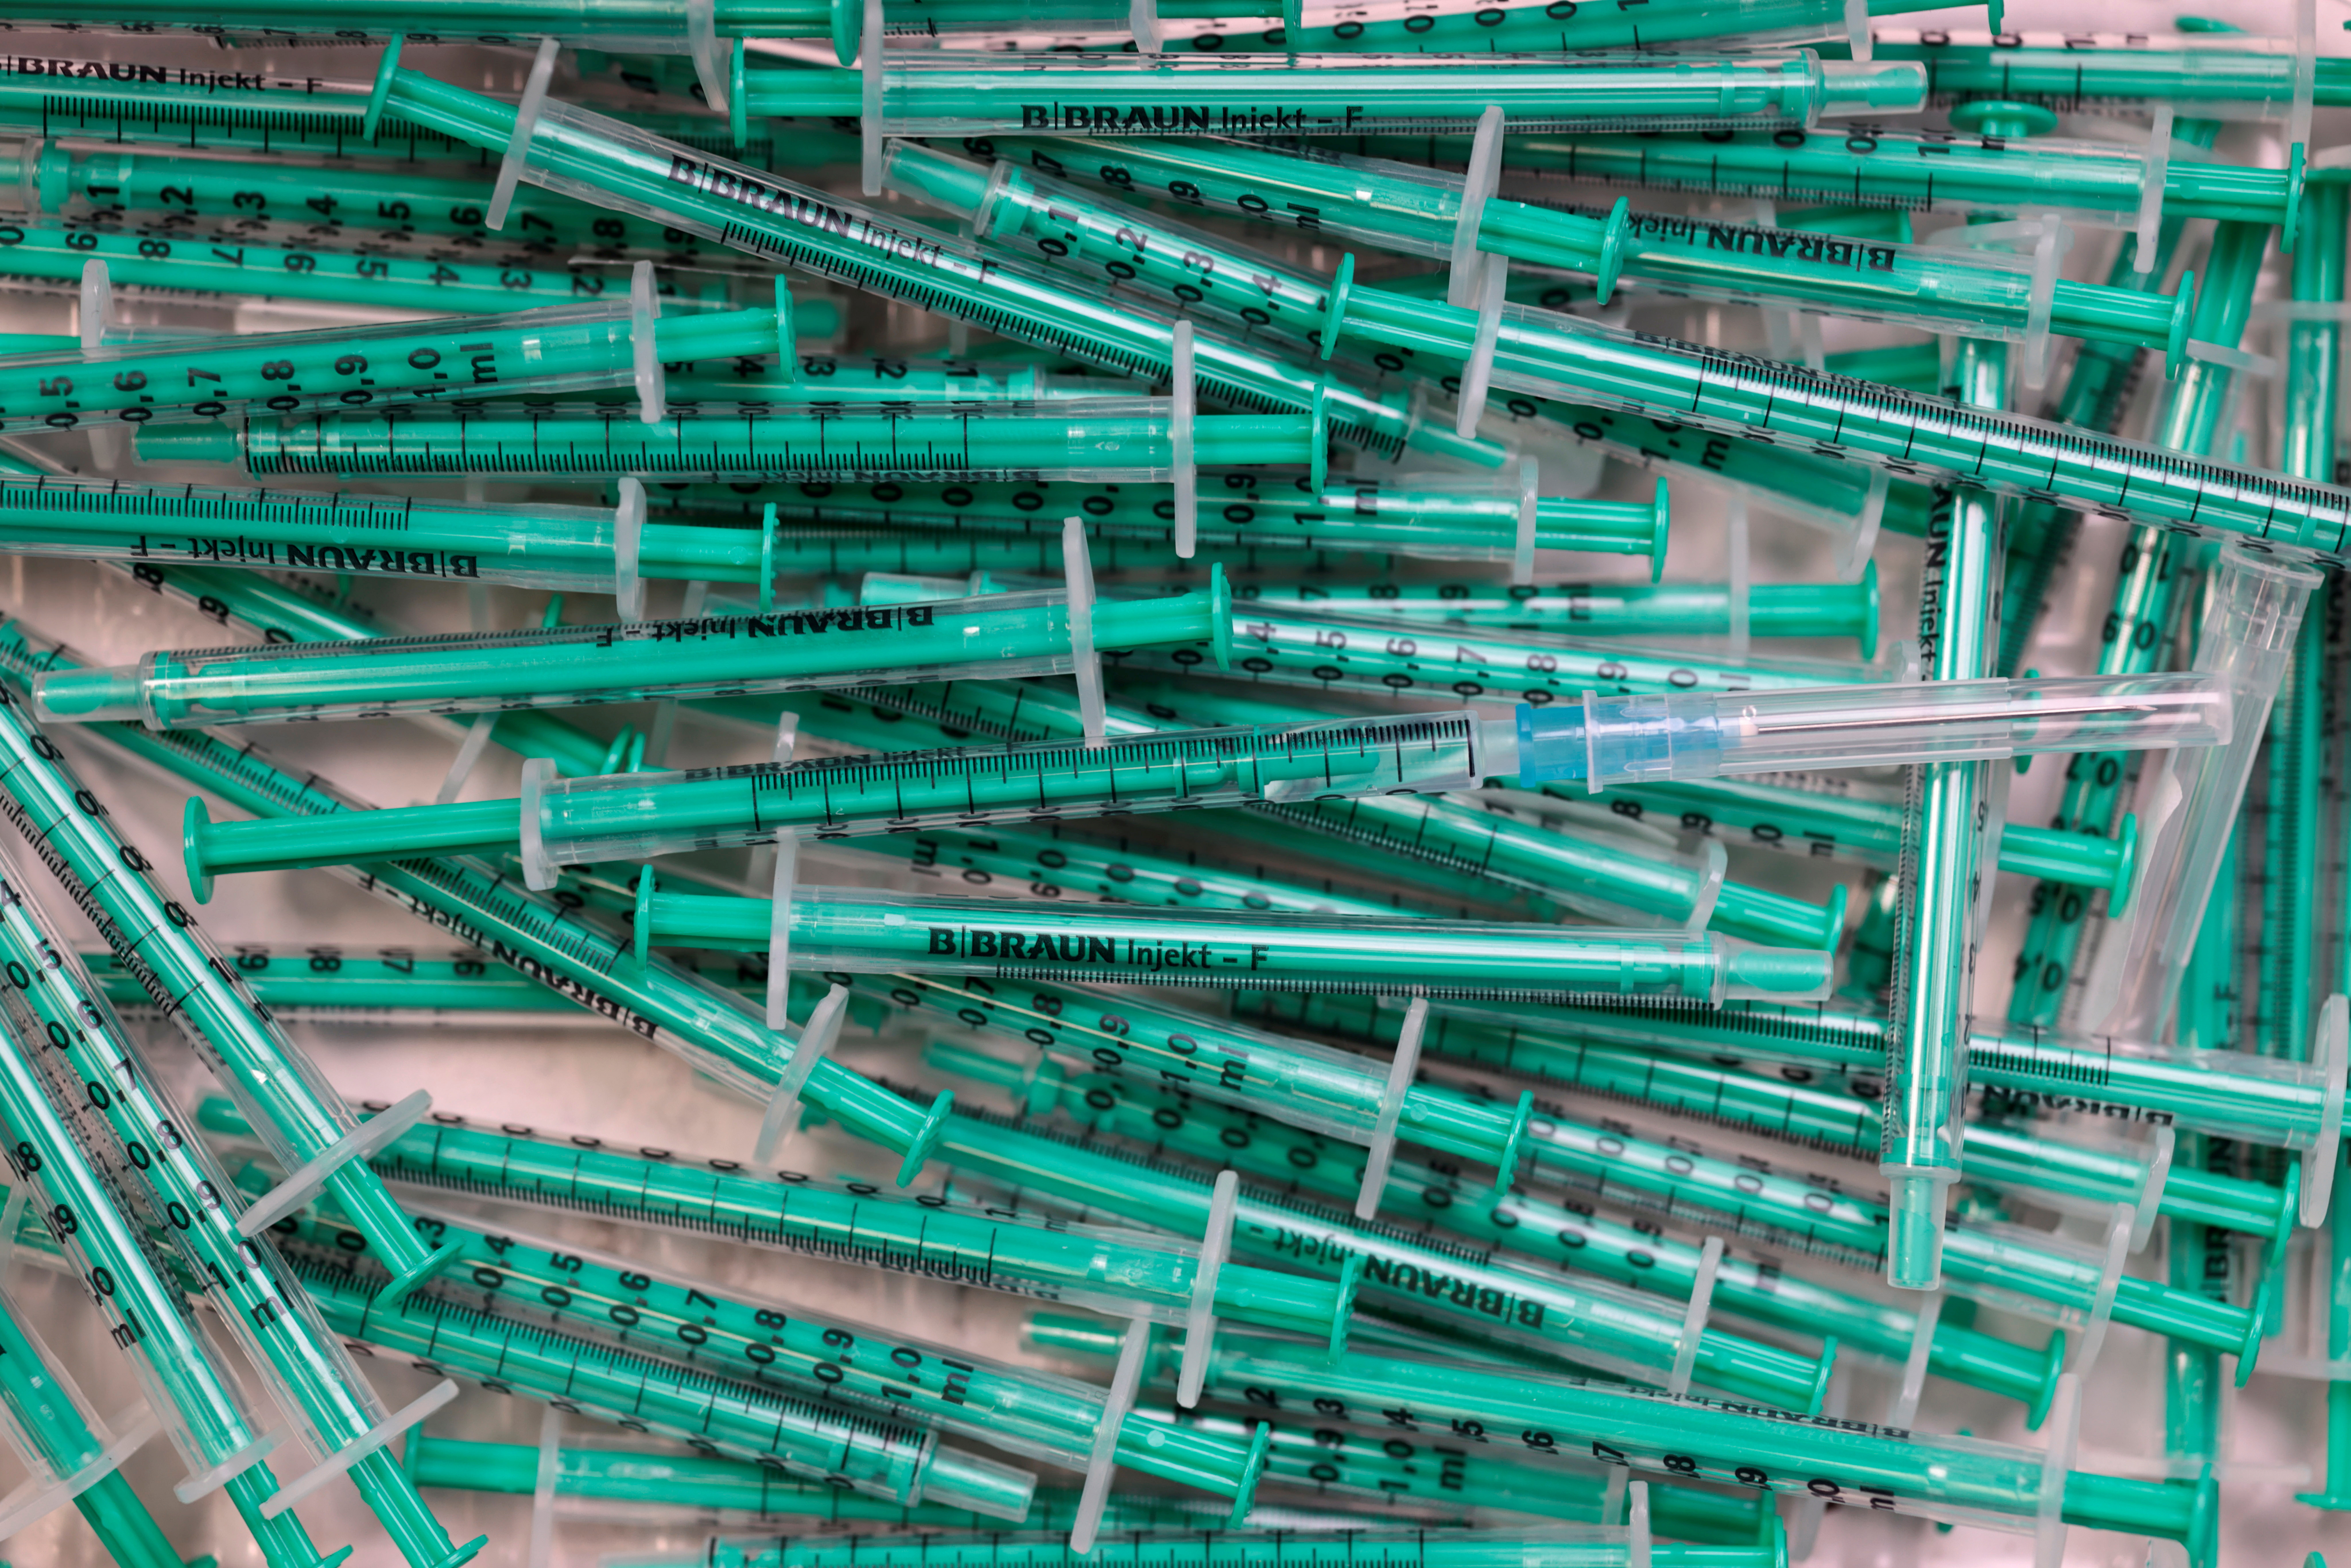 COVID-19 vaccination syringes at a doctor's office in Berlin